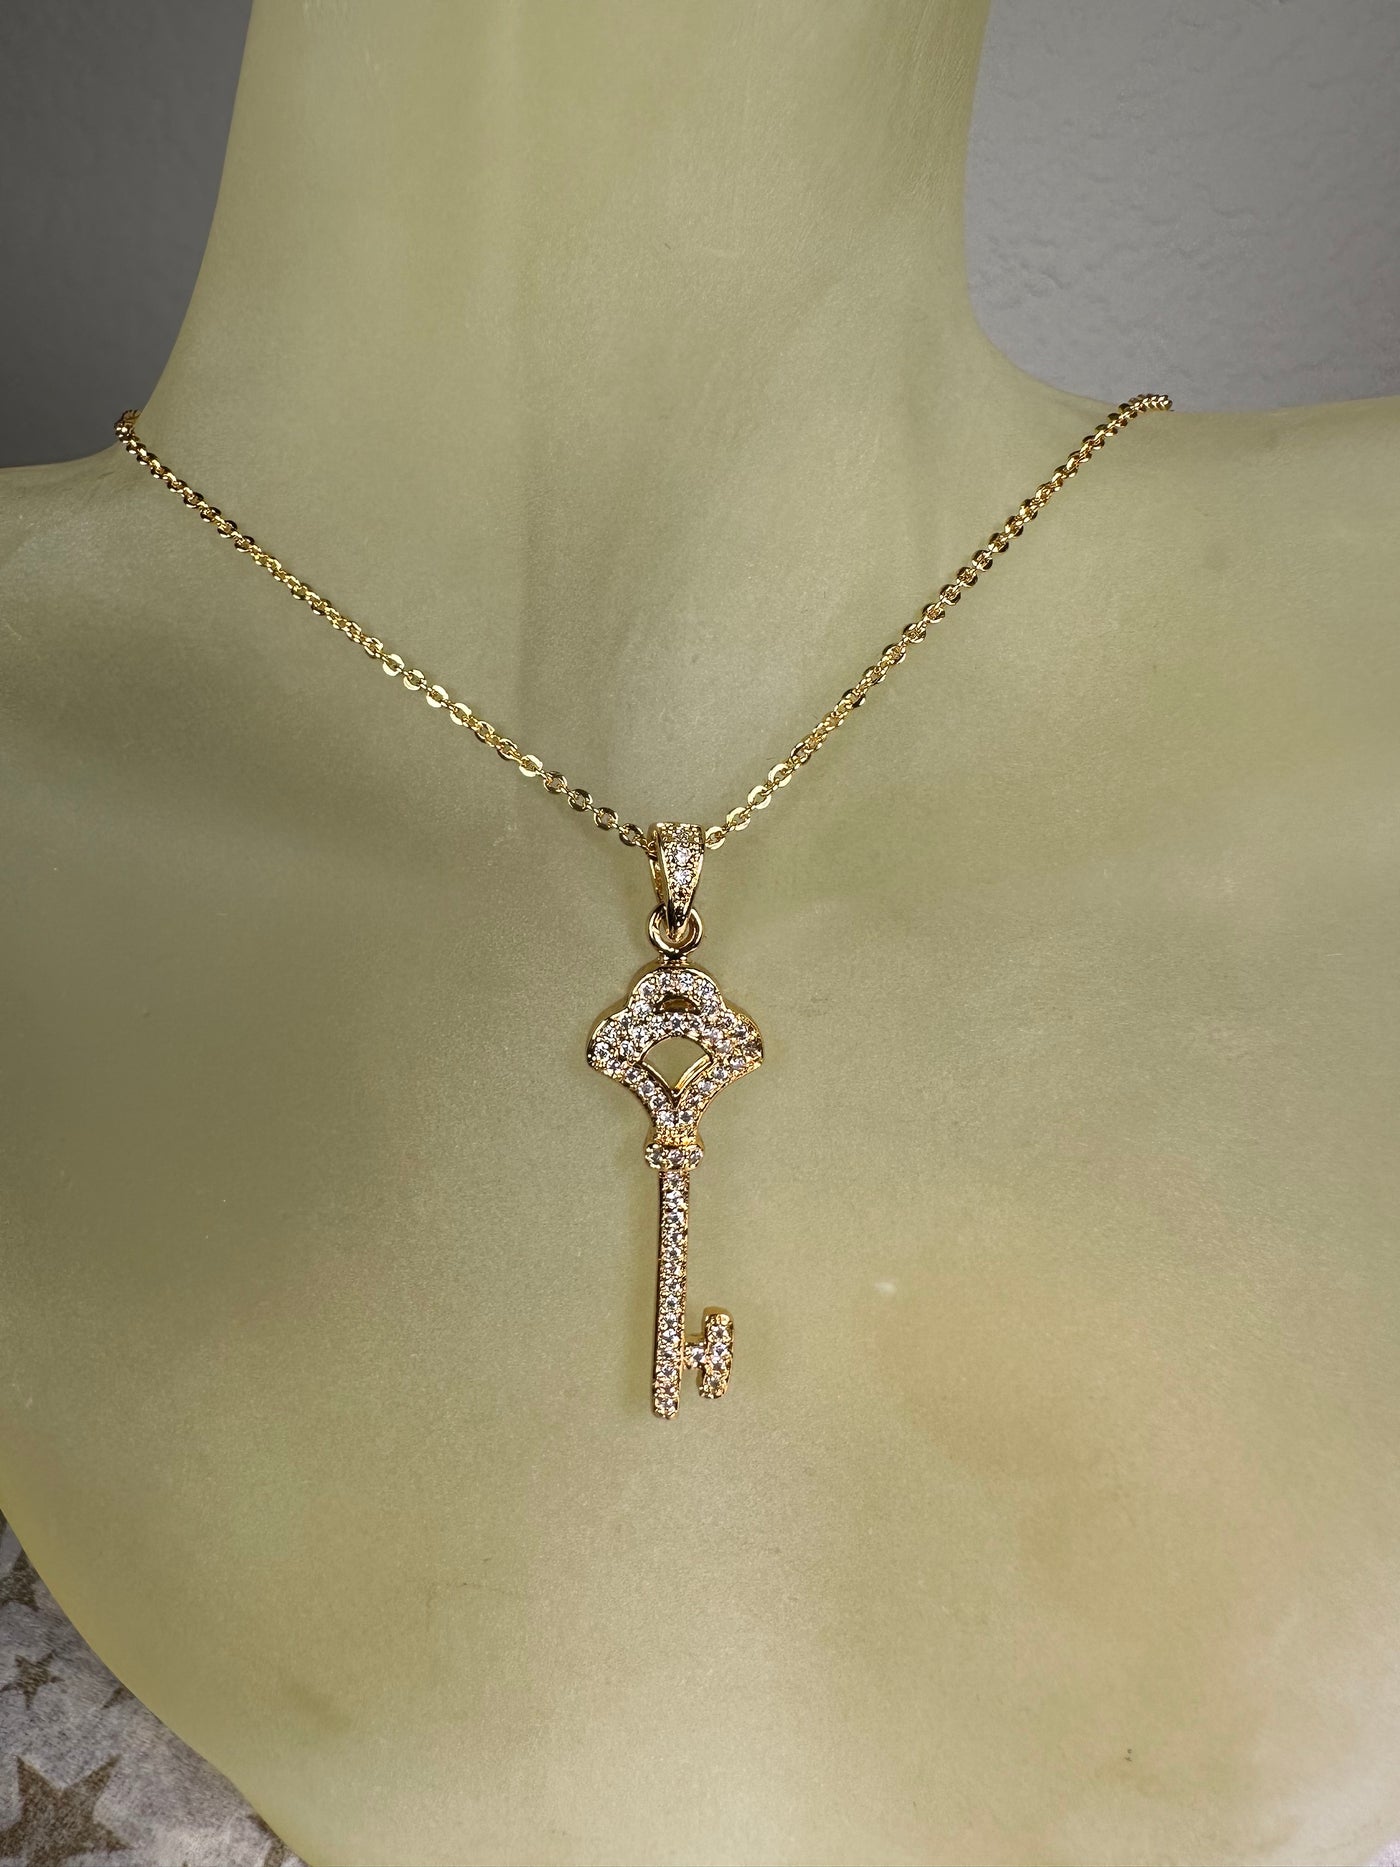 Pave Set Cubic Zirconia Dainty Key Pendant Necklace in Yellow Gold Tone